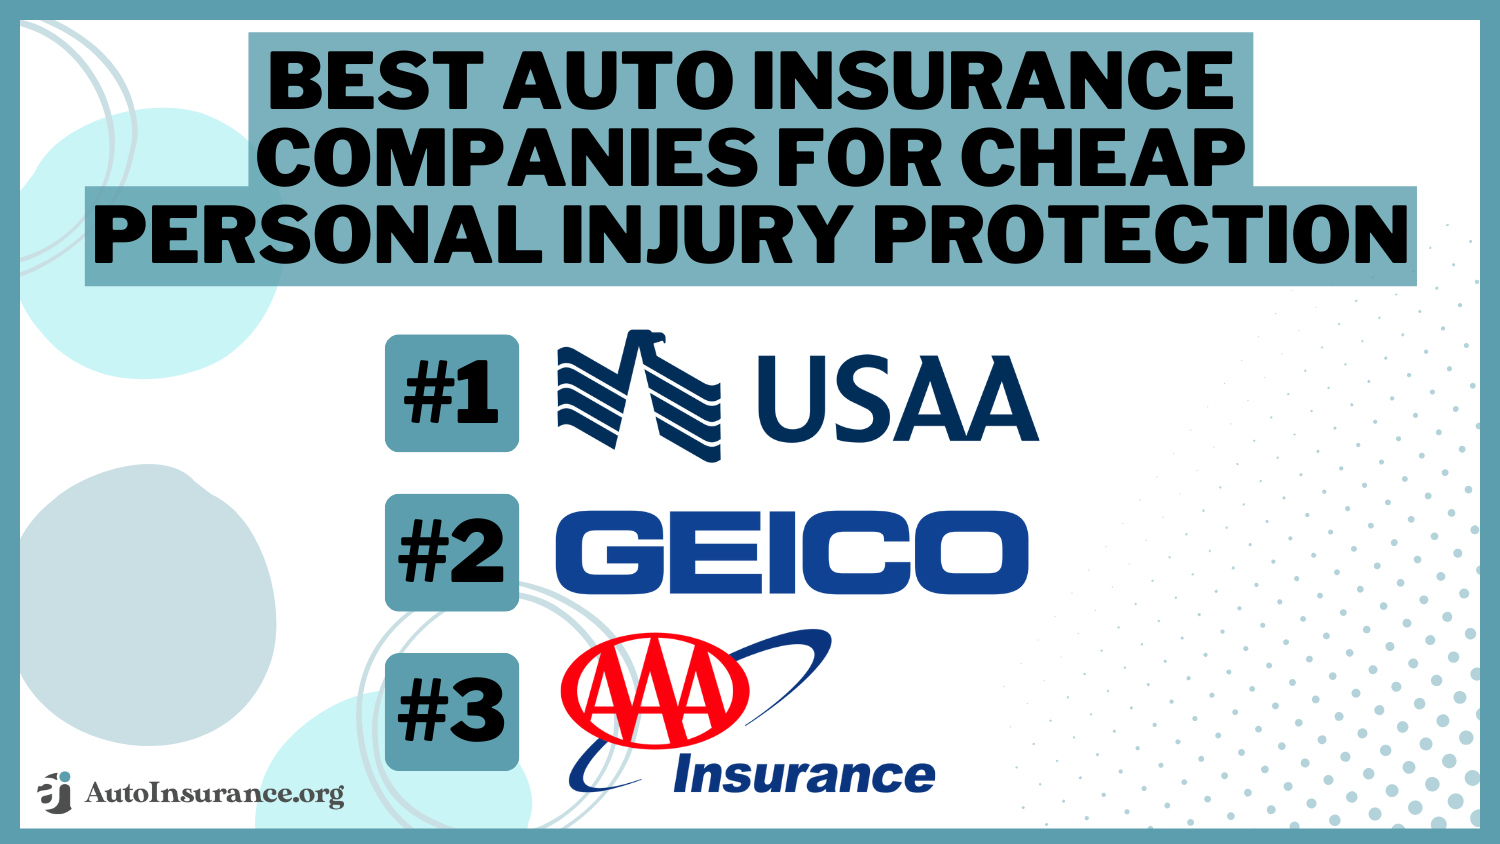 best auto insurance companies for cheap personal injury protection: USAA, Geico, AAA